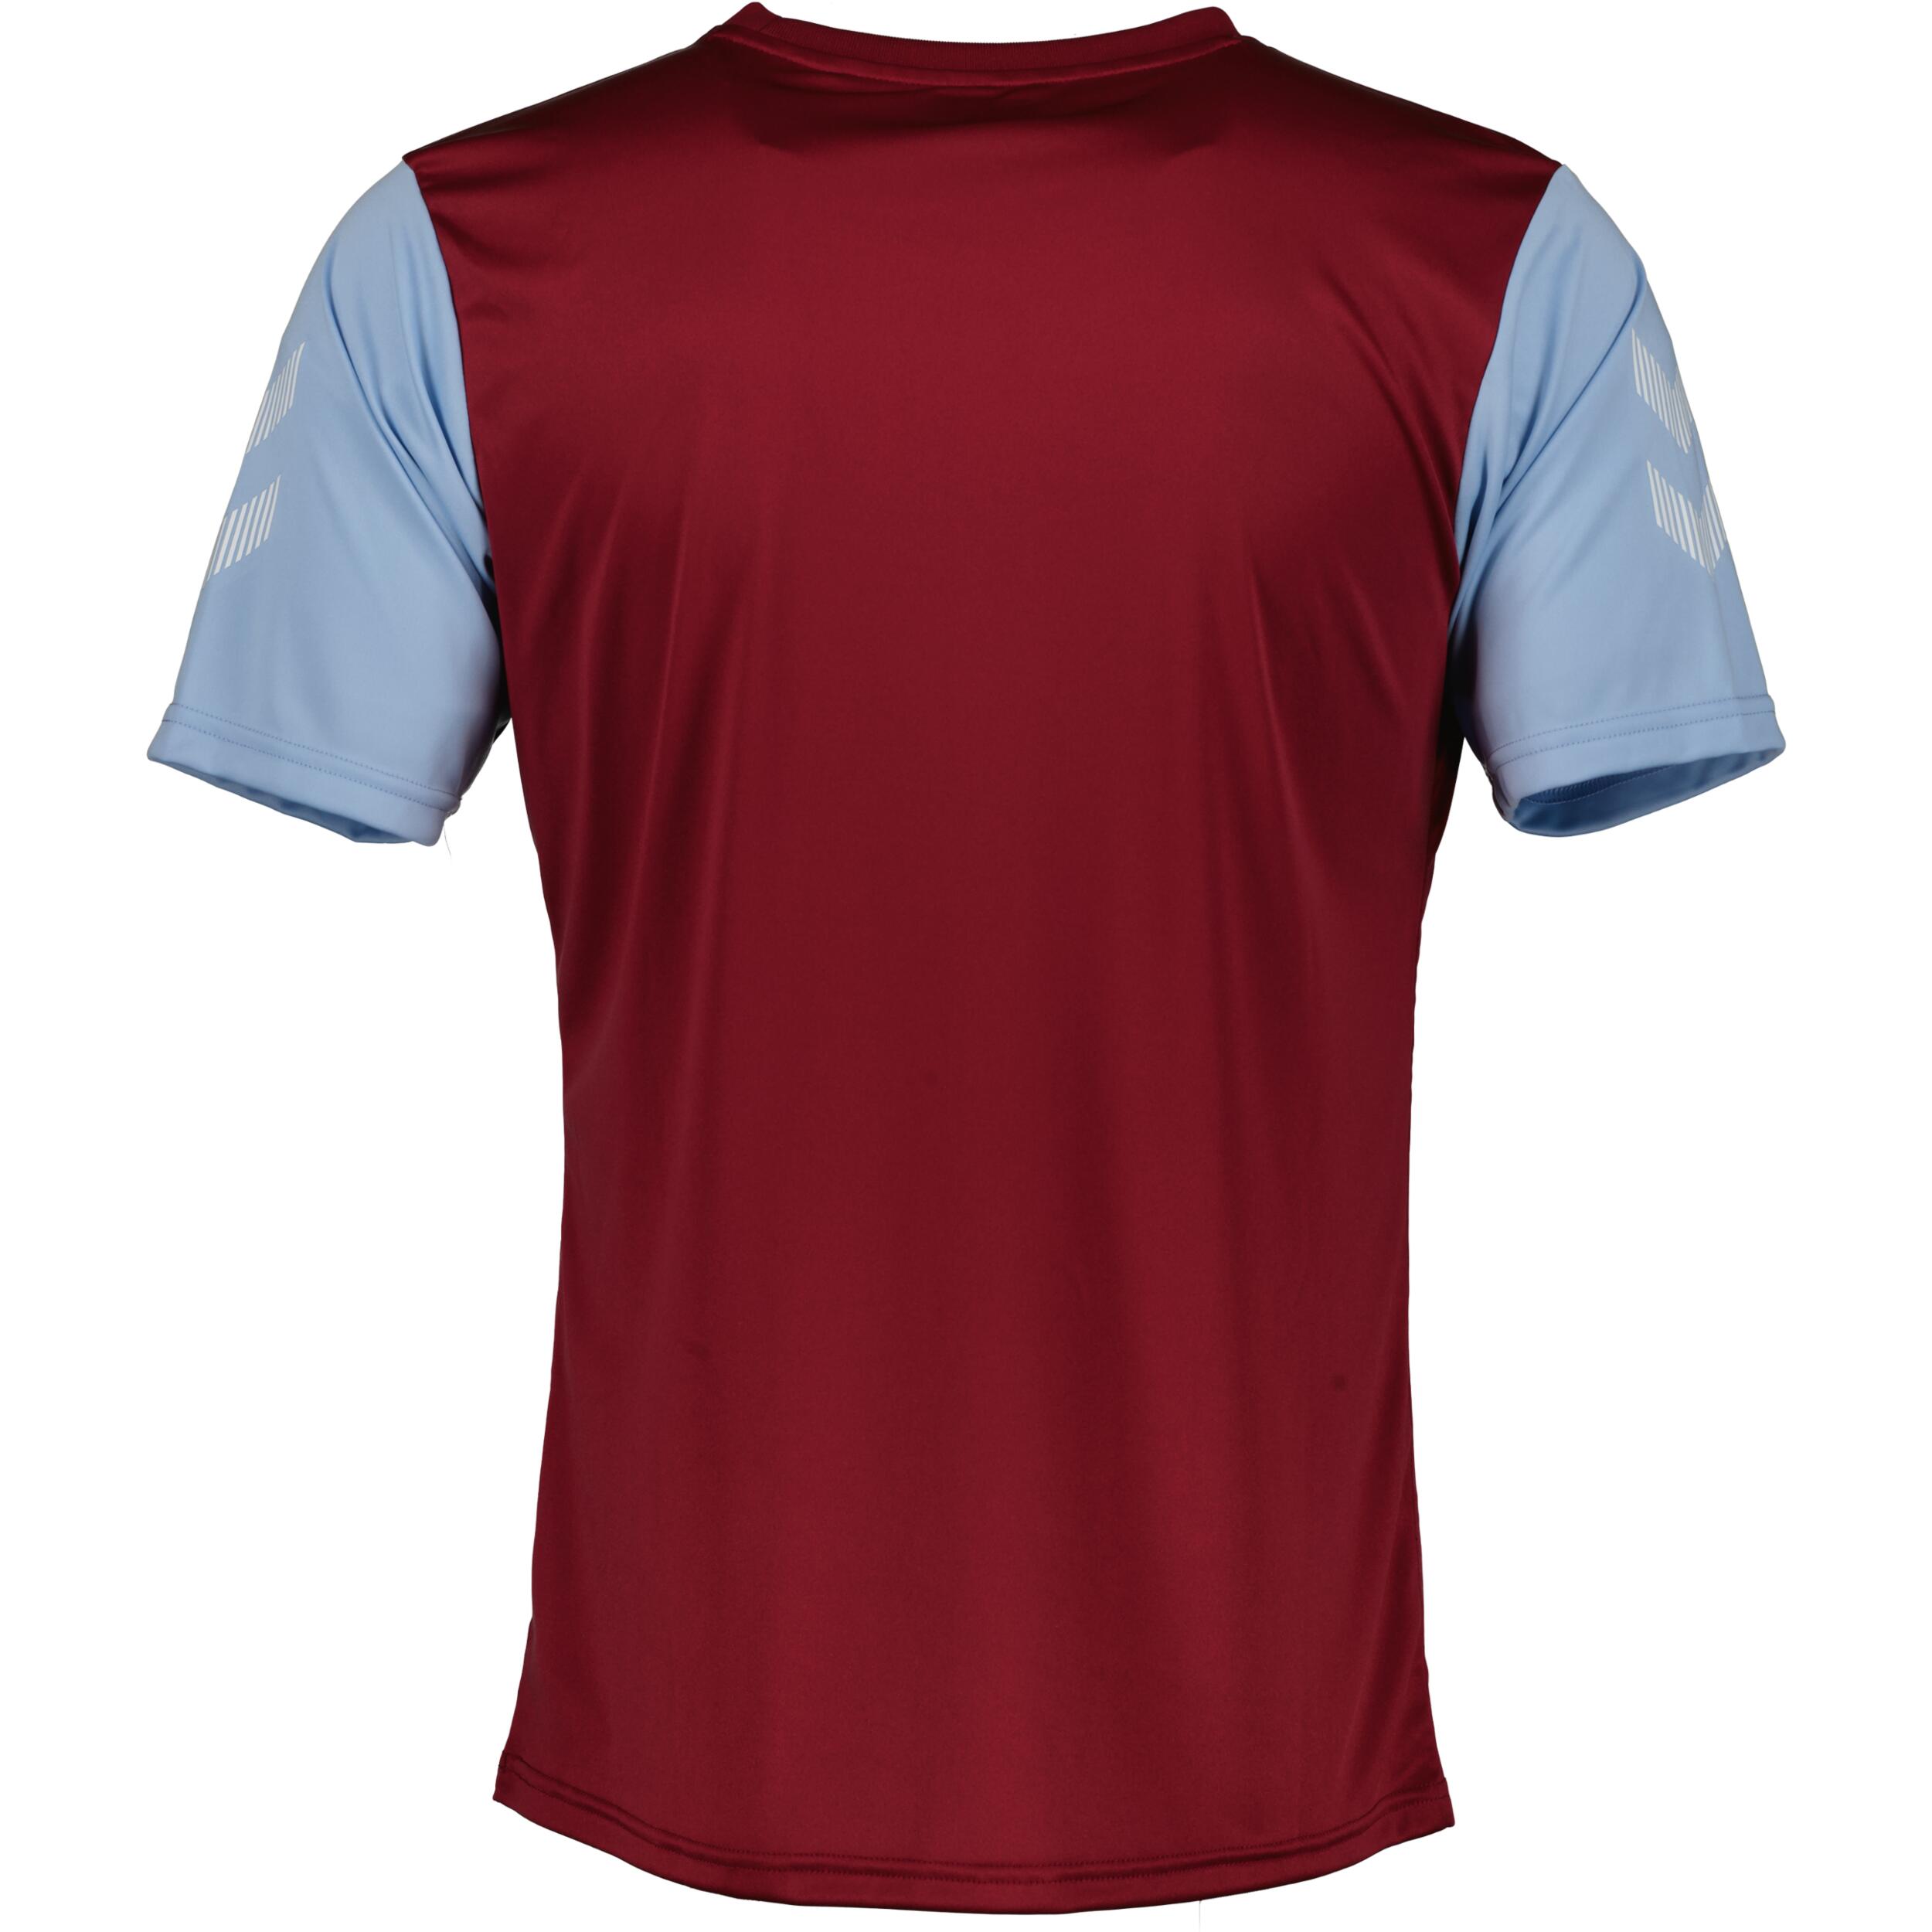 Match jersey for kids, great for football, in maroon/argentina blue 2/3